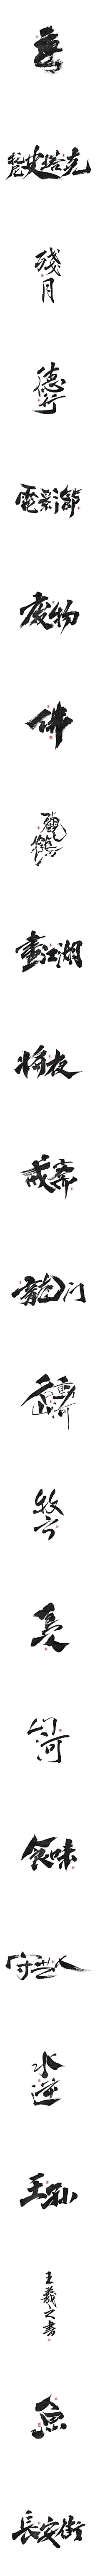 Dyso采集到字体设计